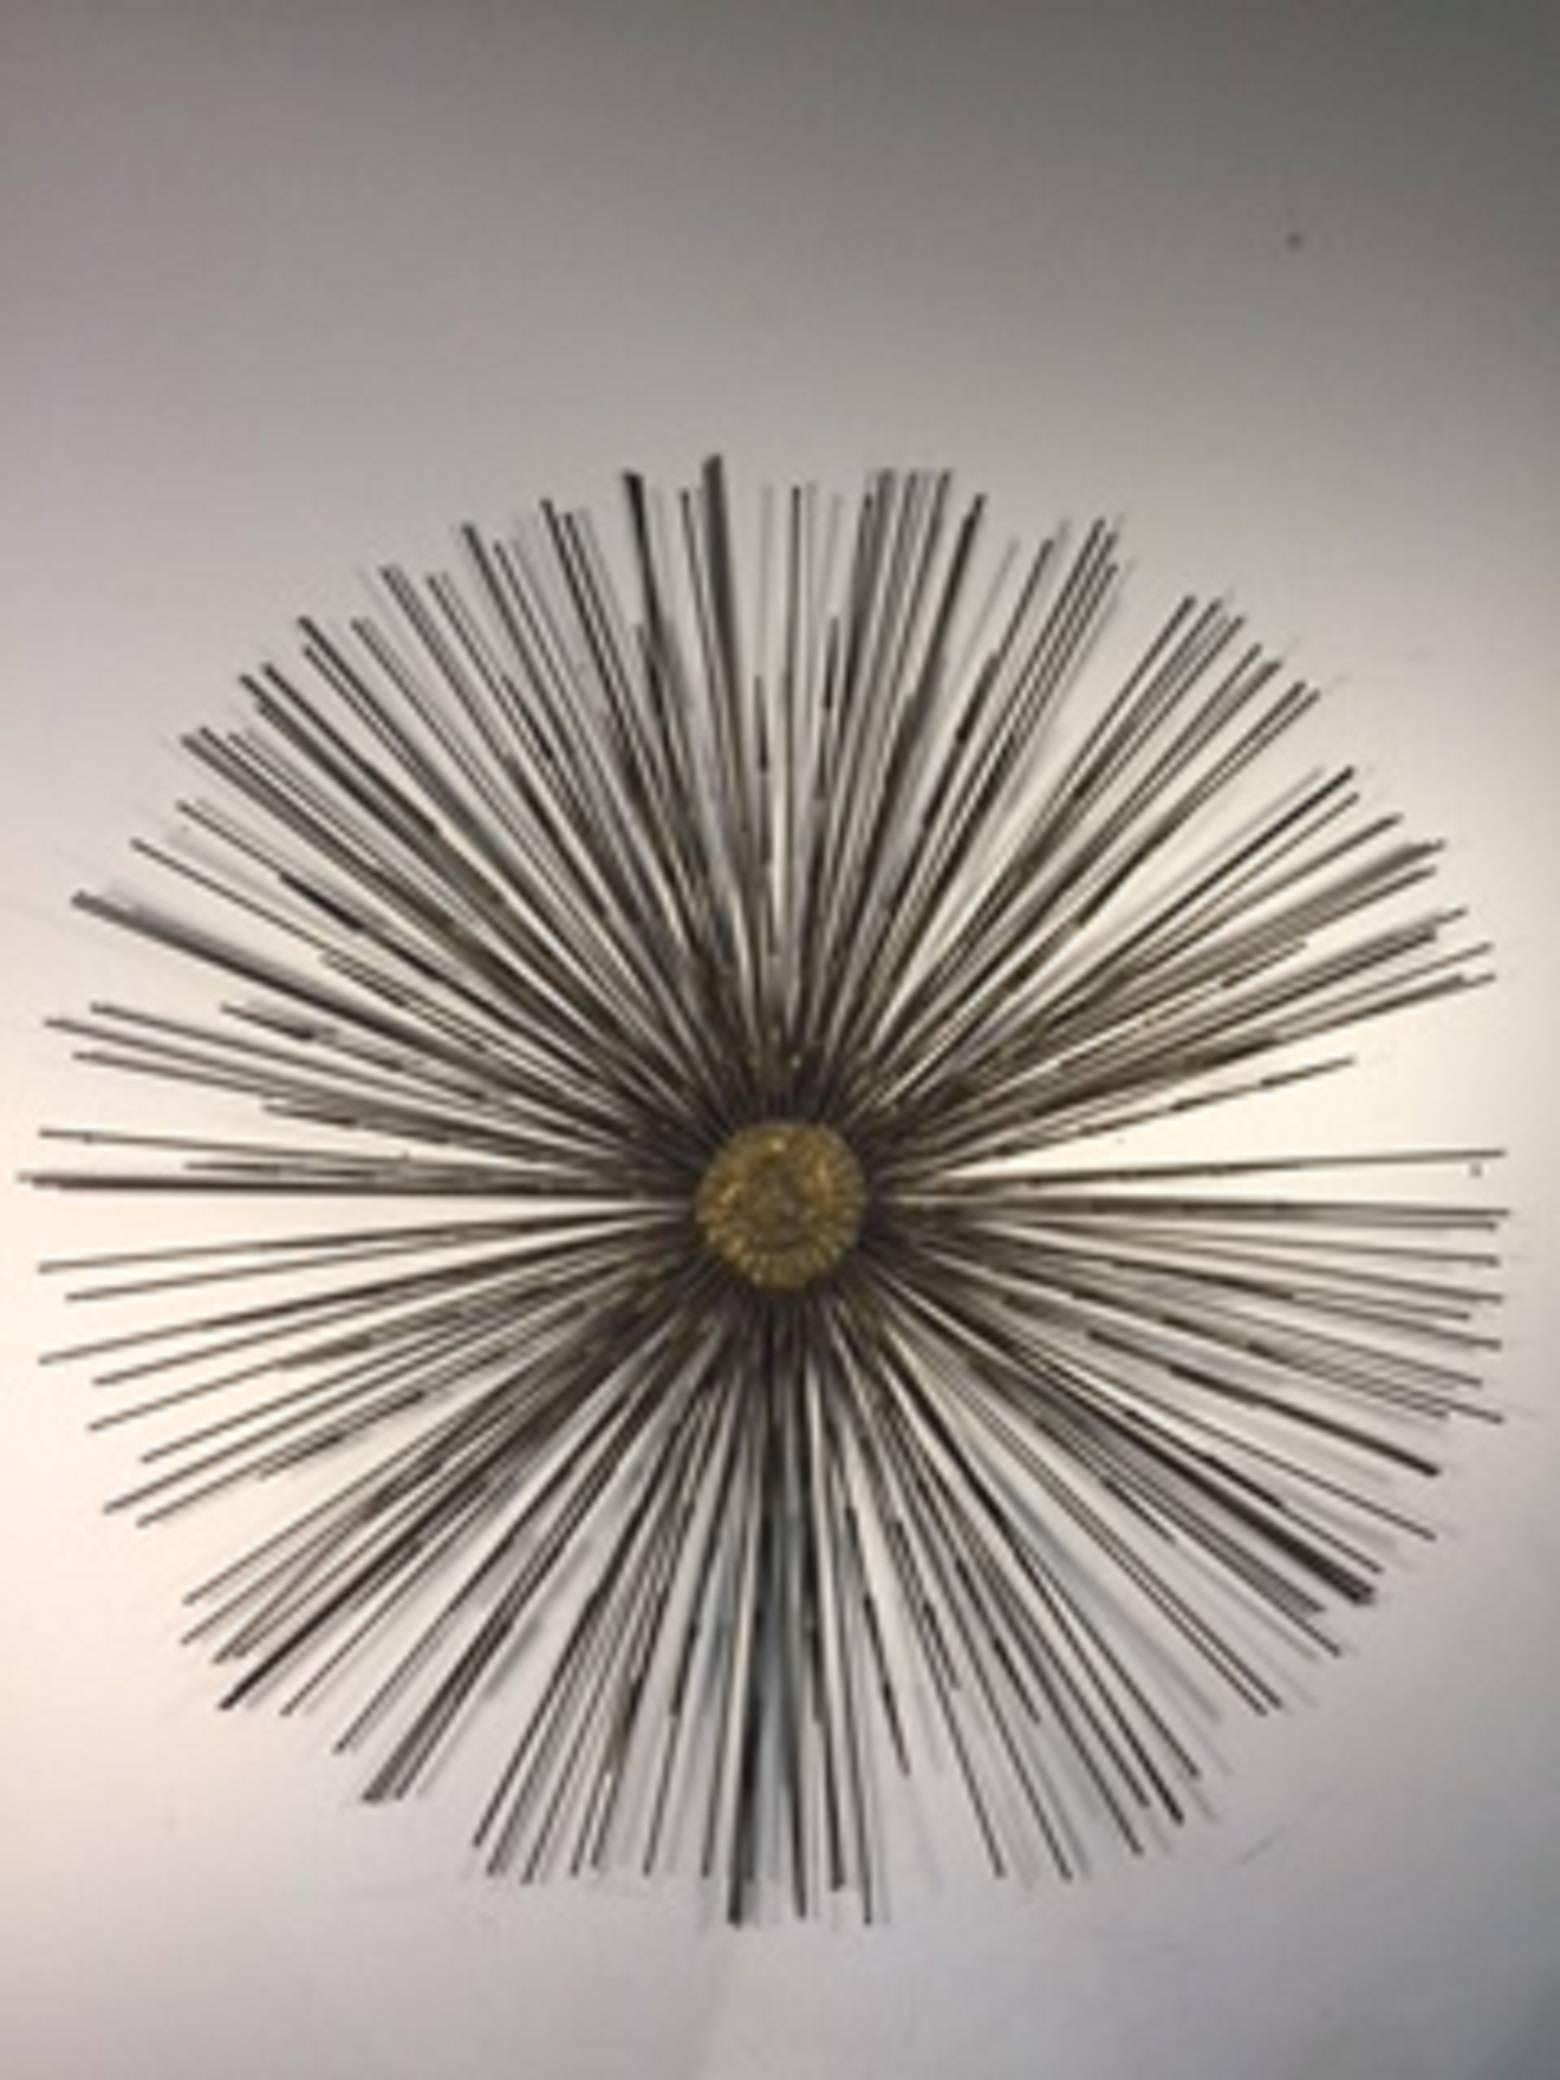 An exceptional Curtis Jere starburst wall-mounted dimensional sculpture with layers of metal spokes, circa 1970.